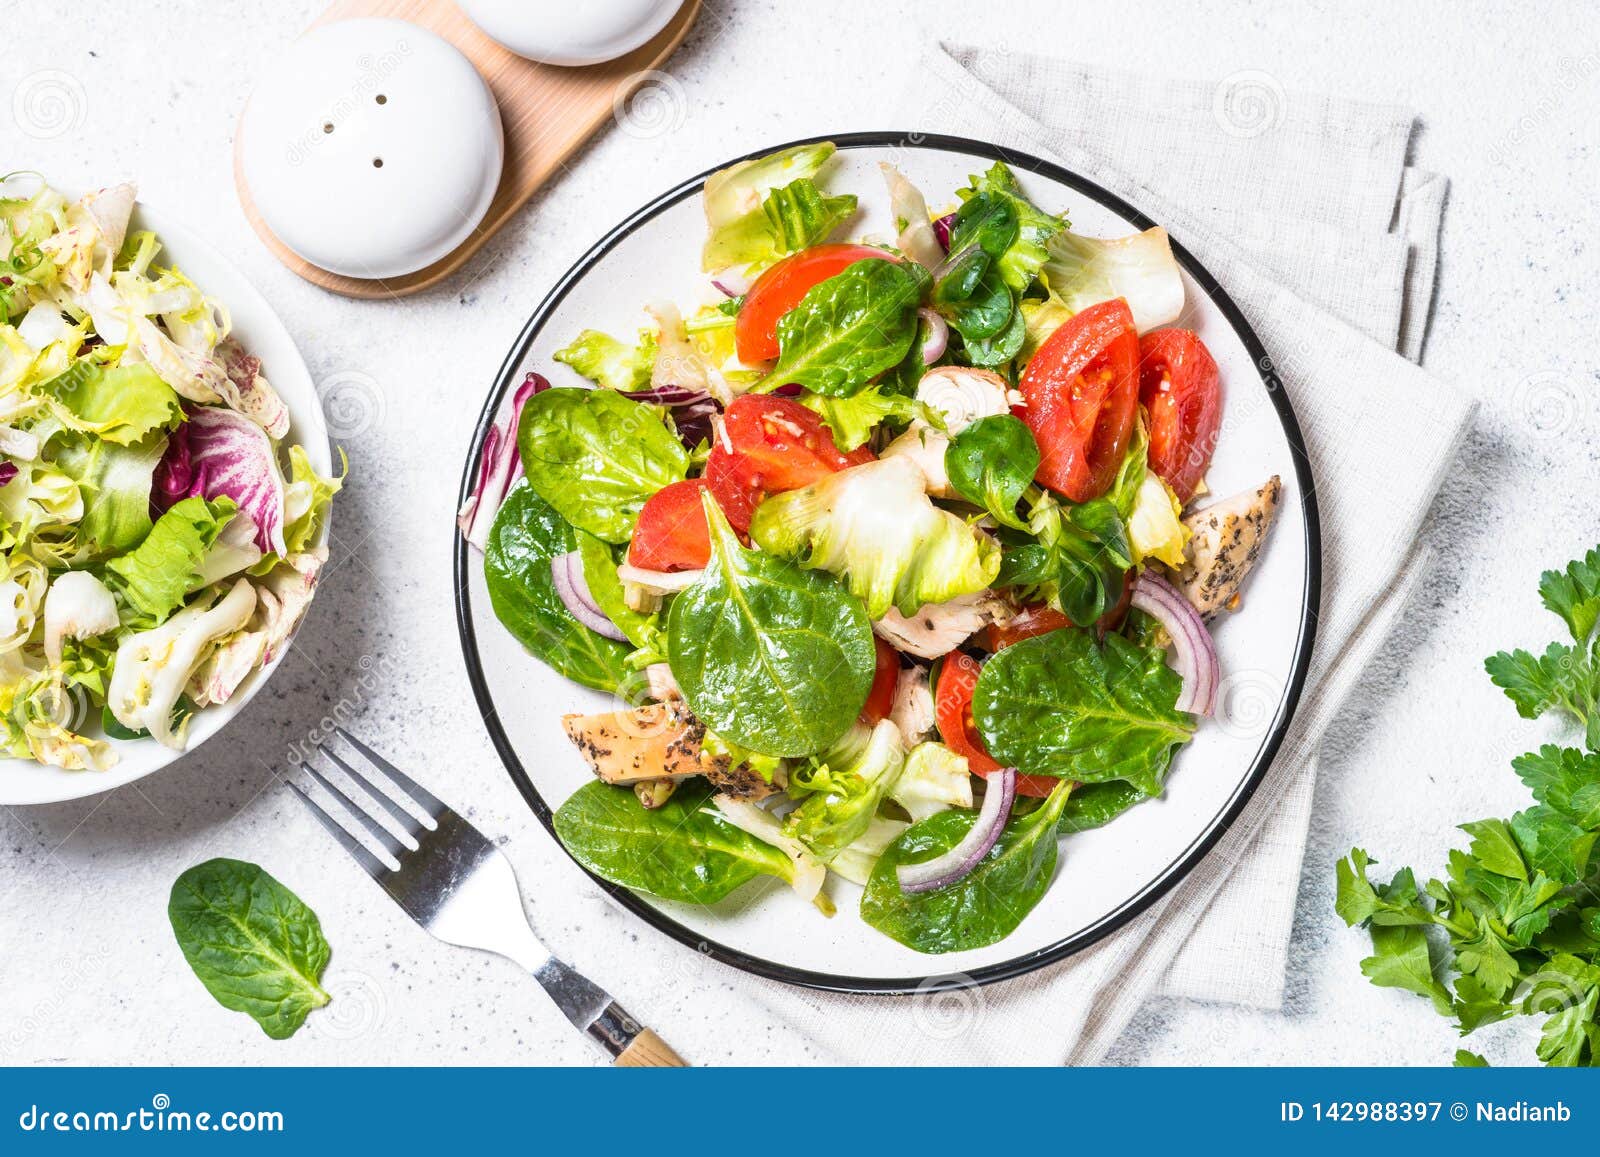 Green Salad with Chicken and Vegetables on White. Stock Image - Image ...